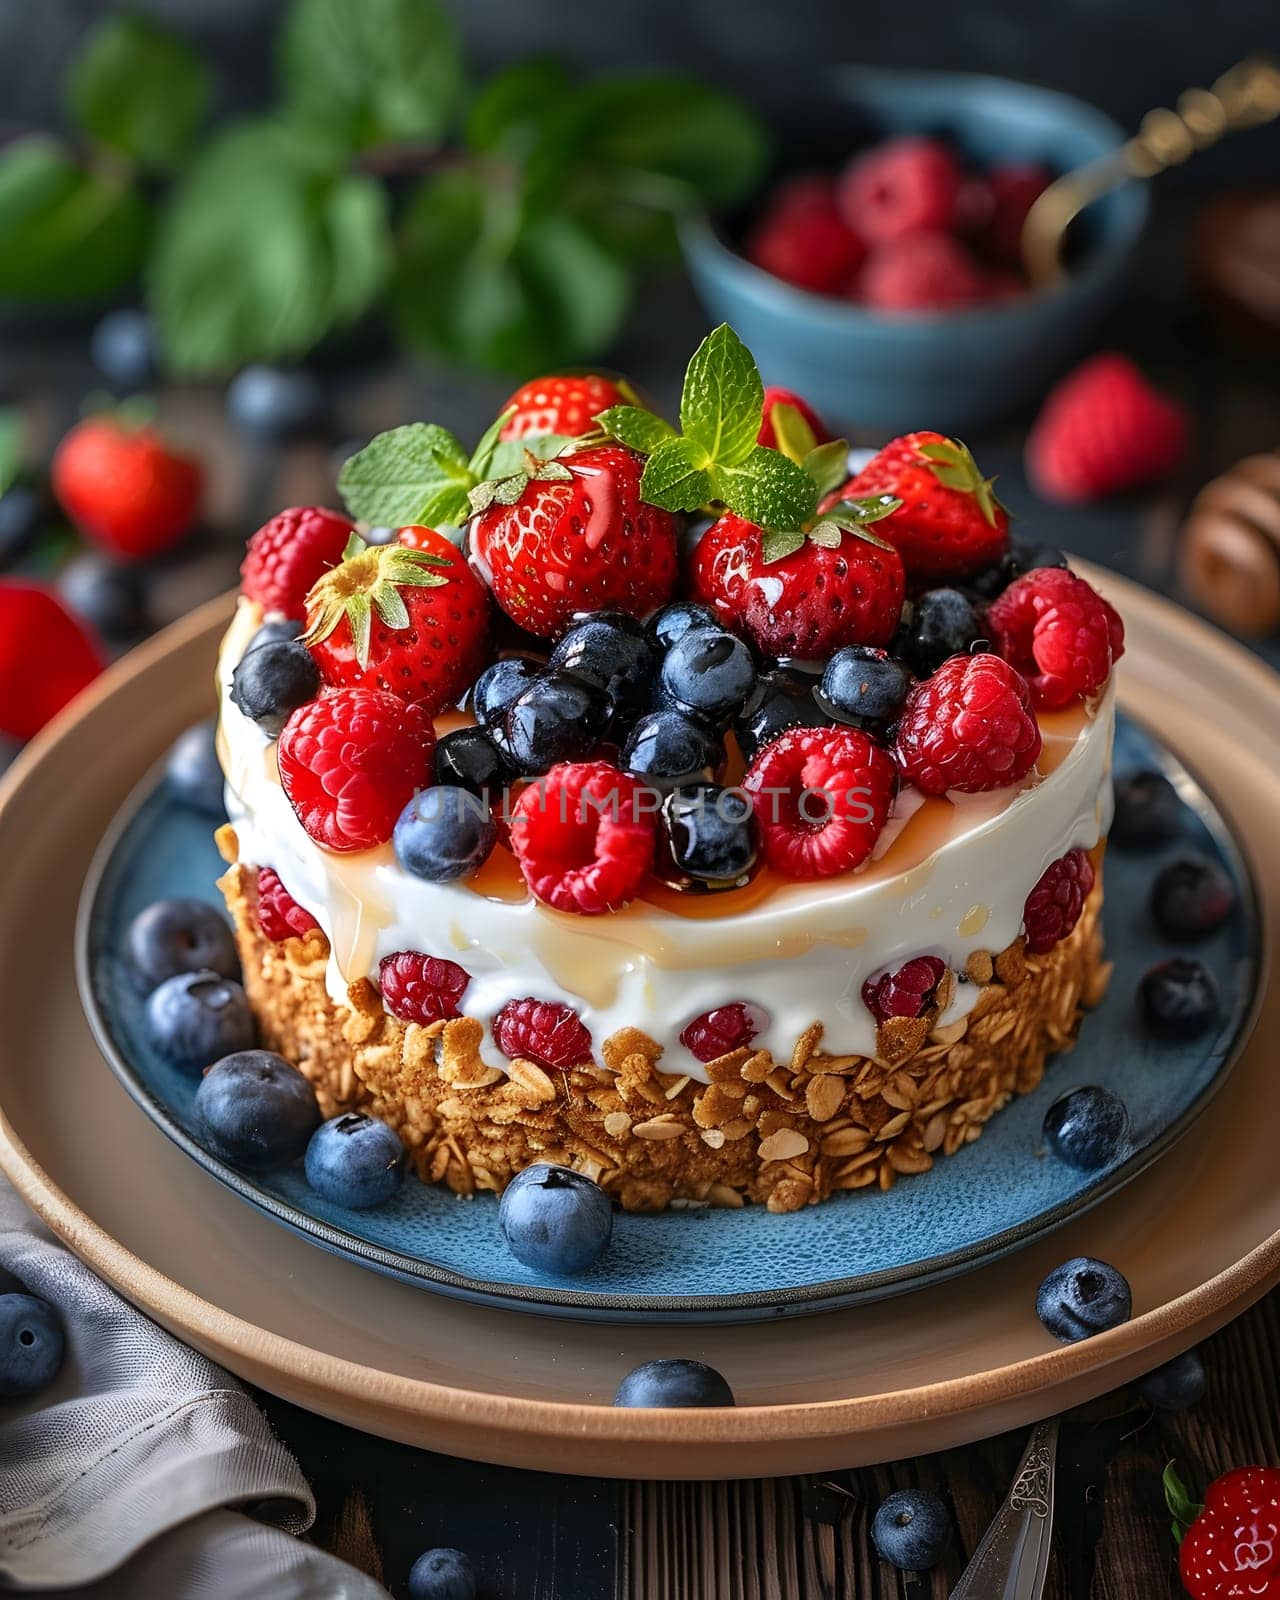 A delicious cake adorned with strawberries, raspberries, blueberries, and granola beautifully displayed on a plate, perfect for any dessert table